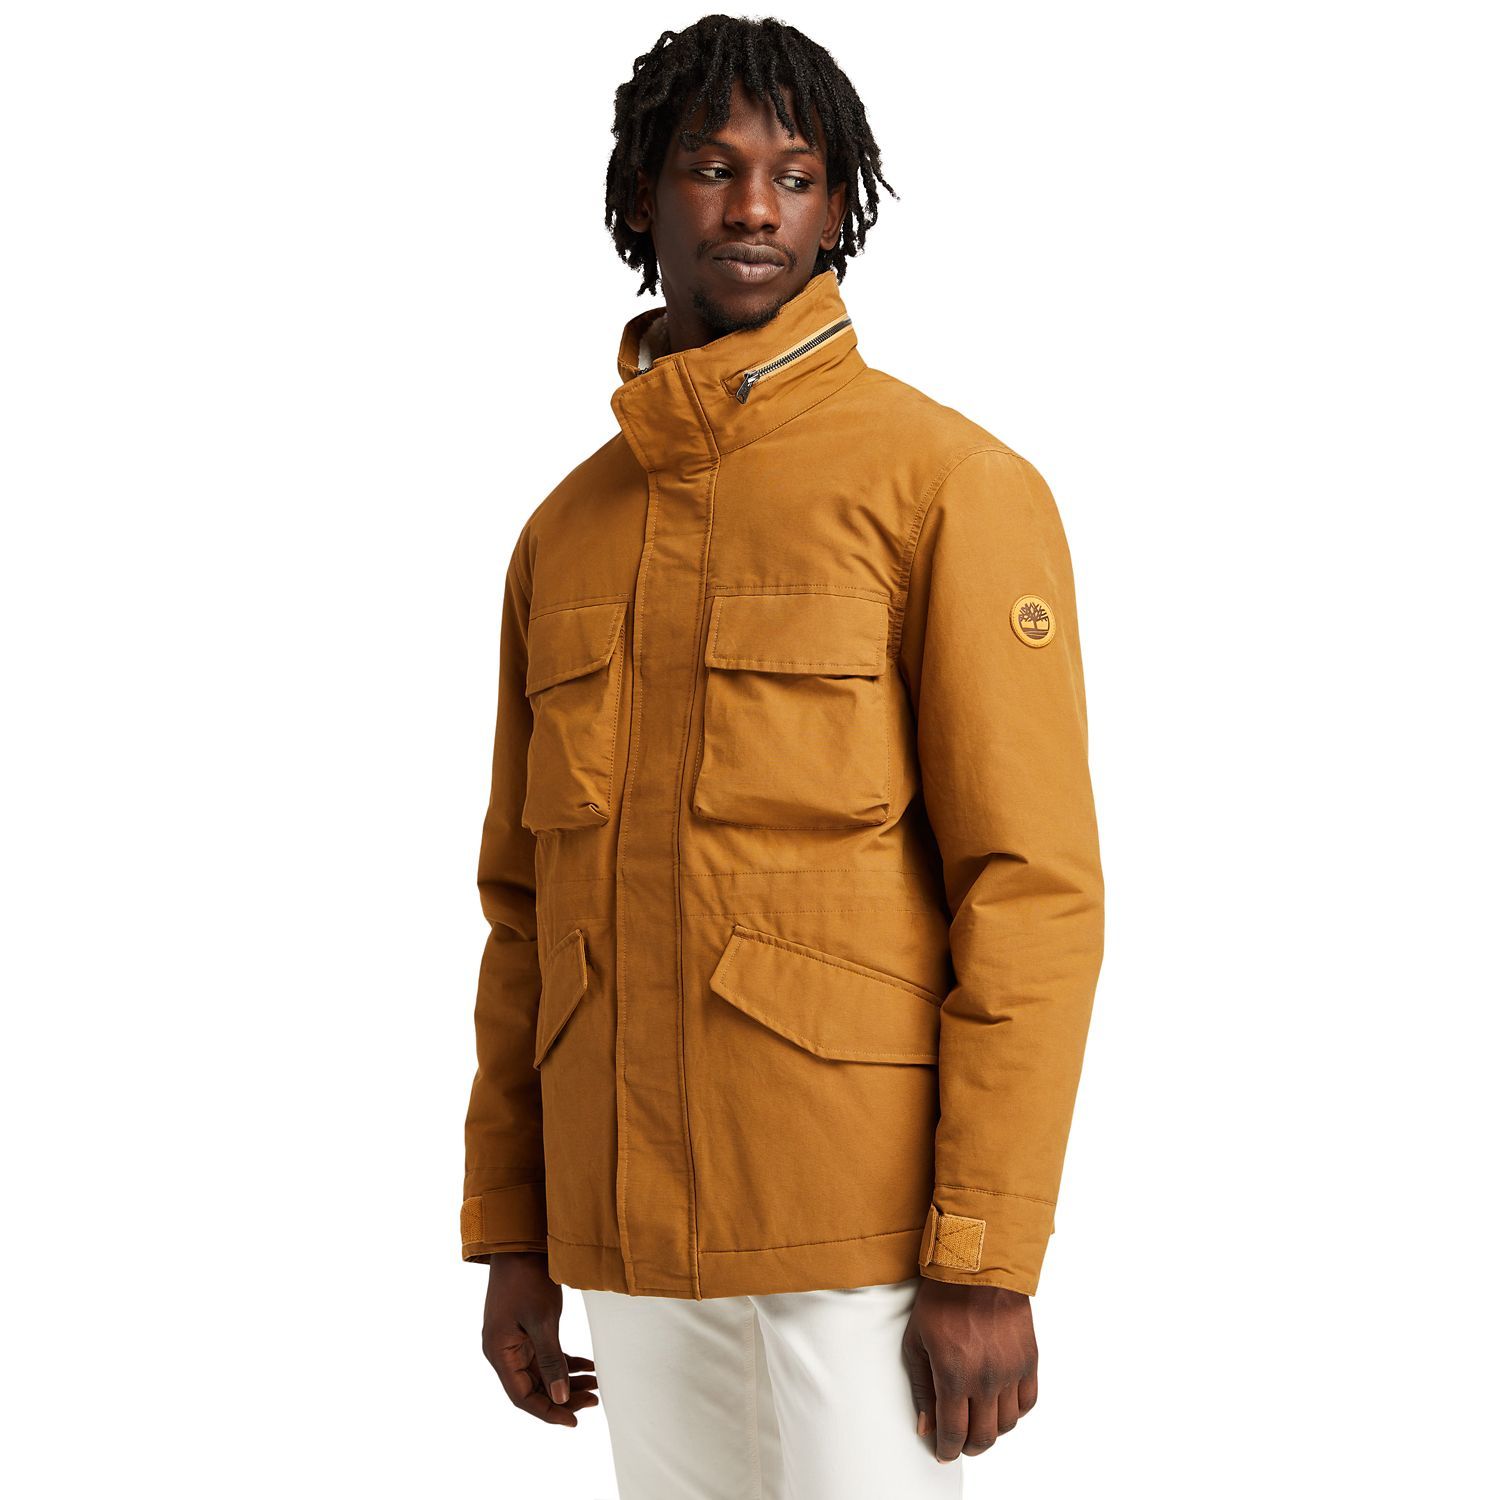 The 44 Best Jackets for Men in 2021 - Parkas, Coats